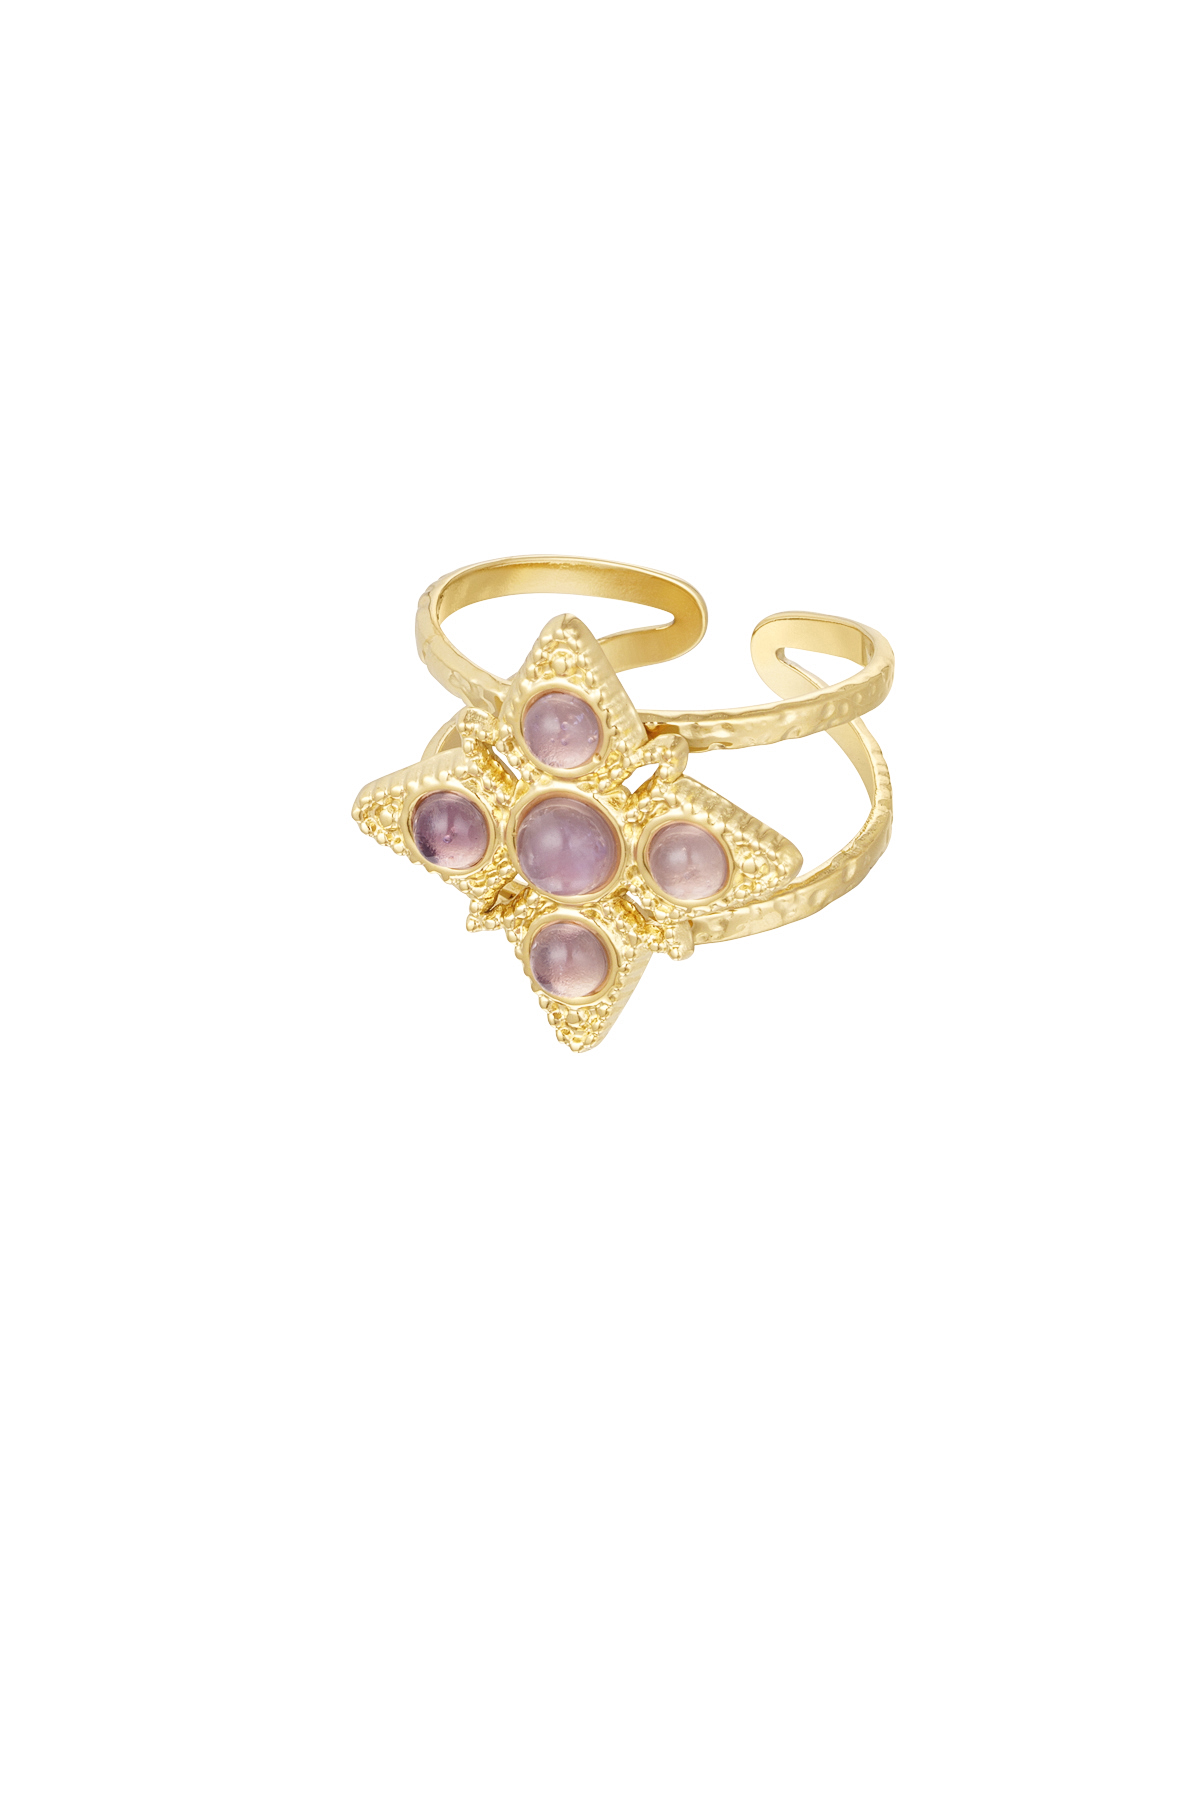 Ring star with stones - gold/purple h5 